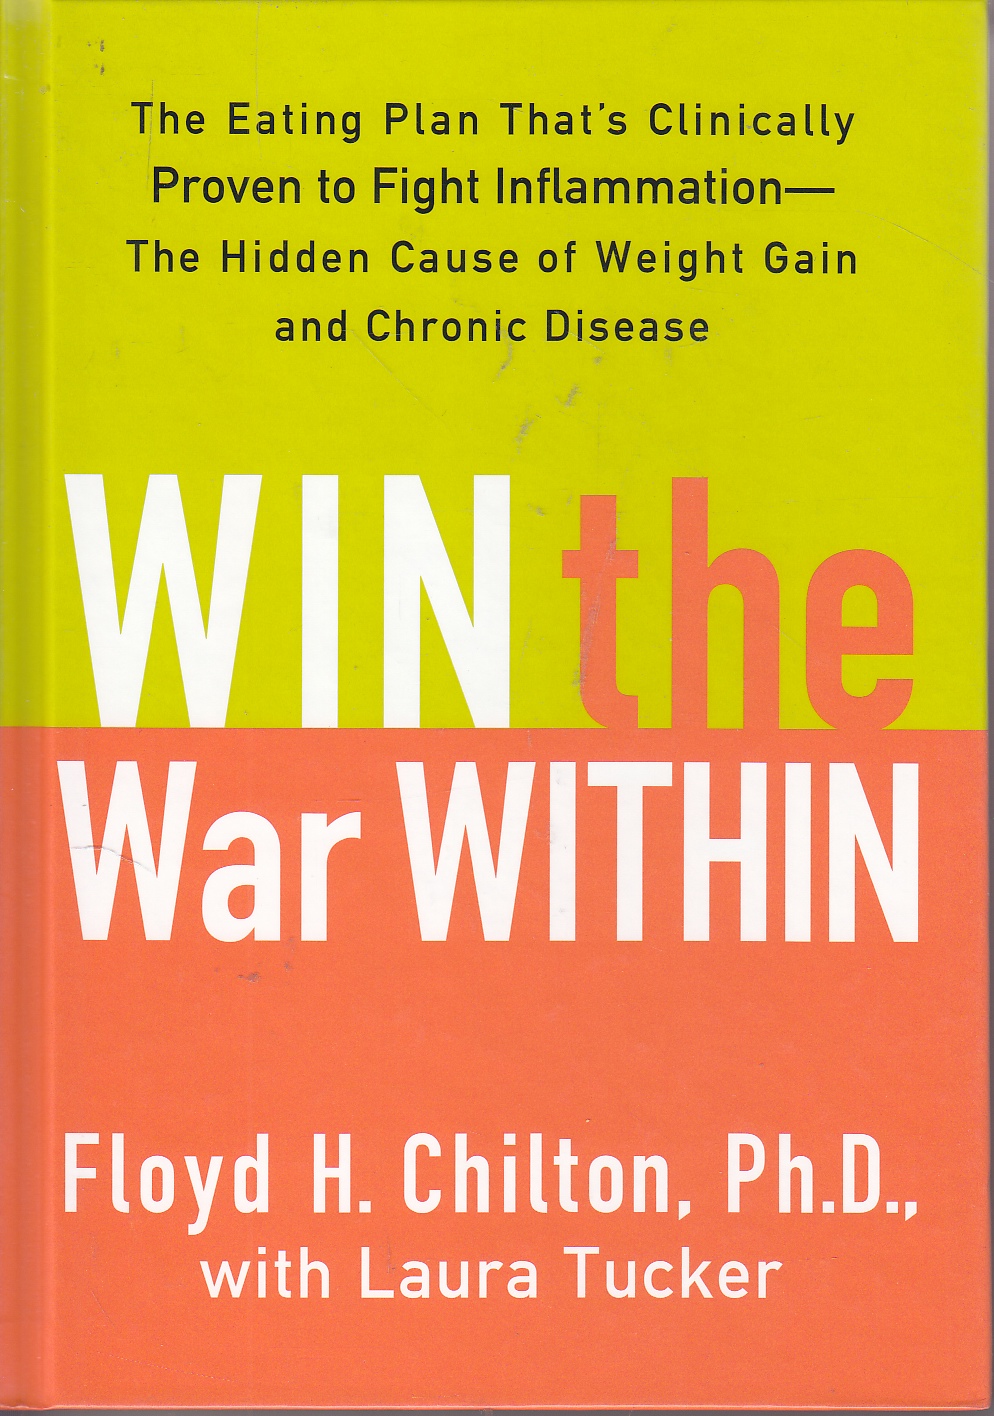 Image for Win the War Within The Eating Plan That's Clinically Proven to Fight Inflammation - the Hidden Cause of Weight Gain and Chronic Disease